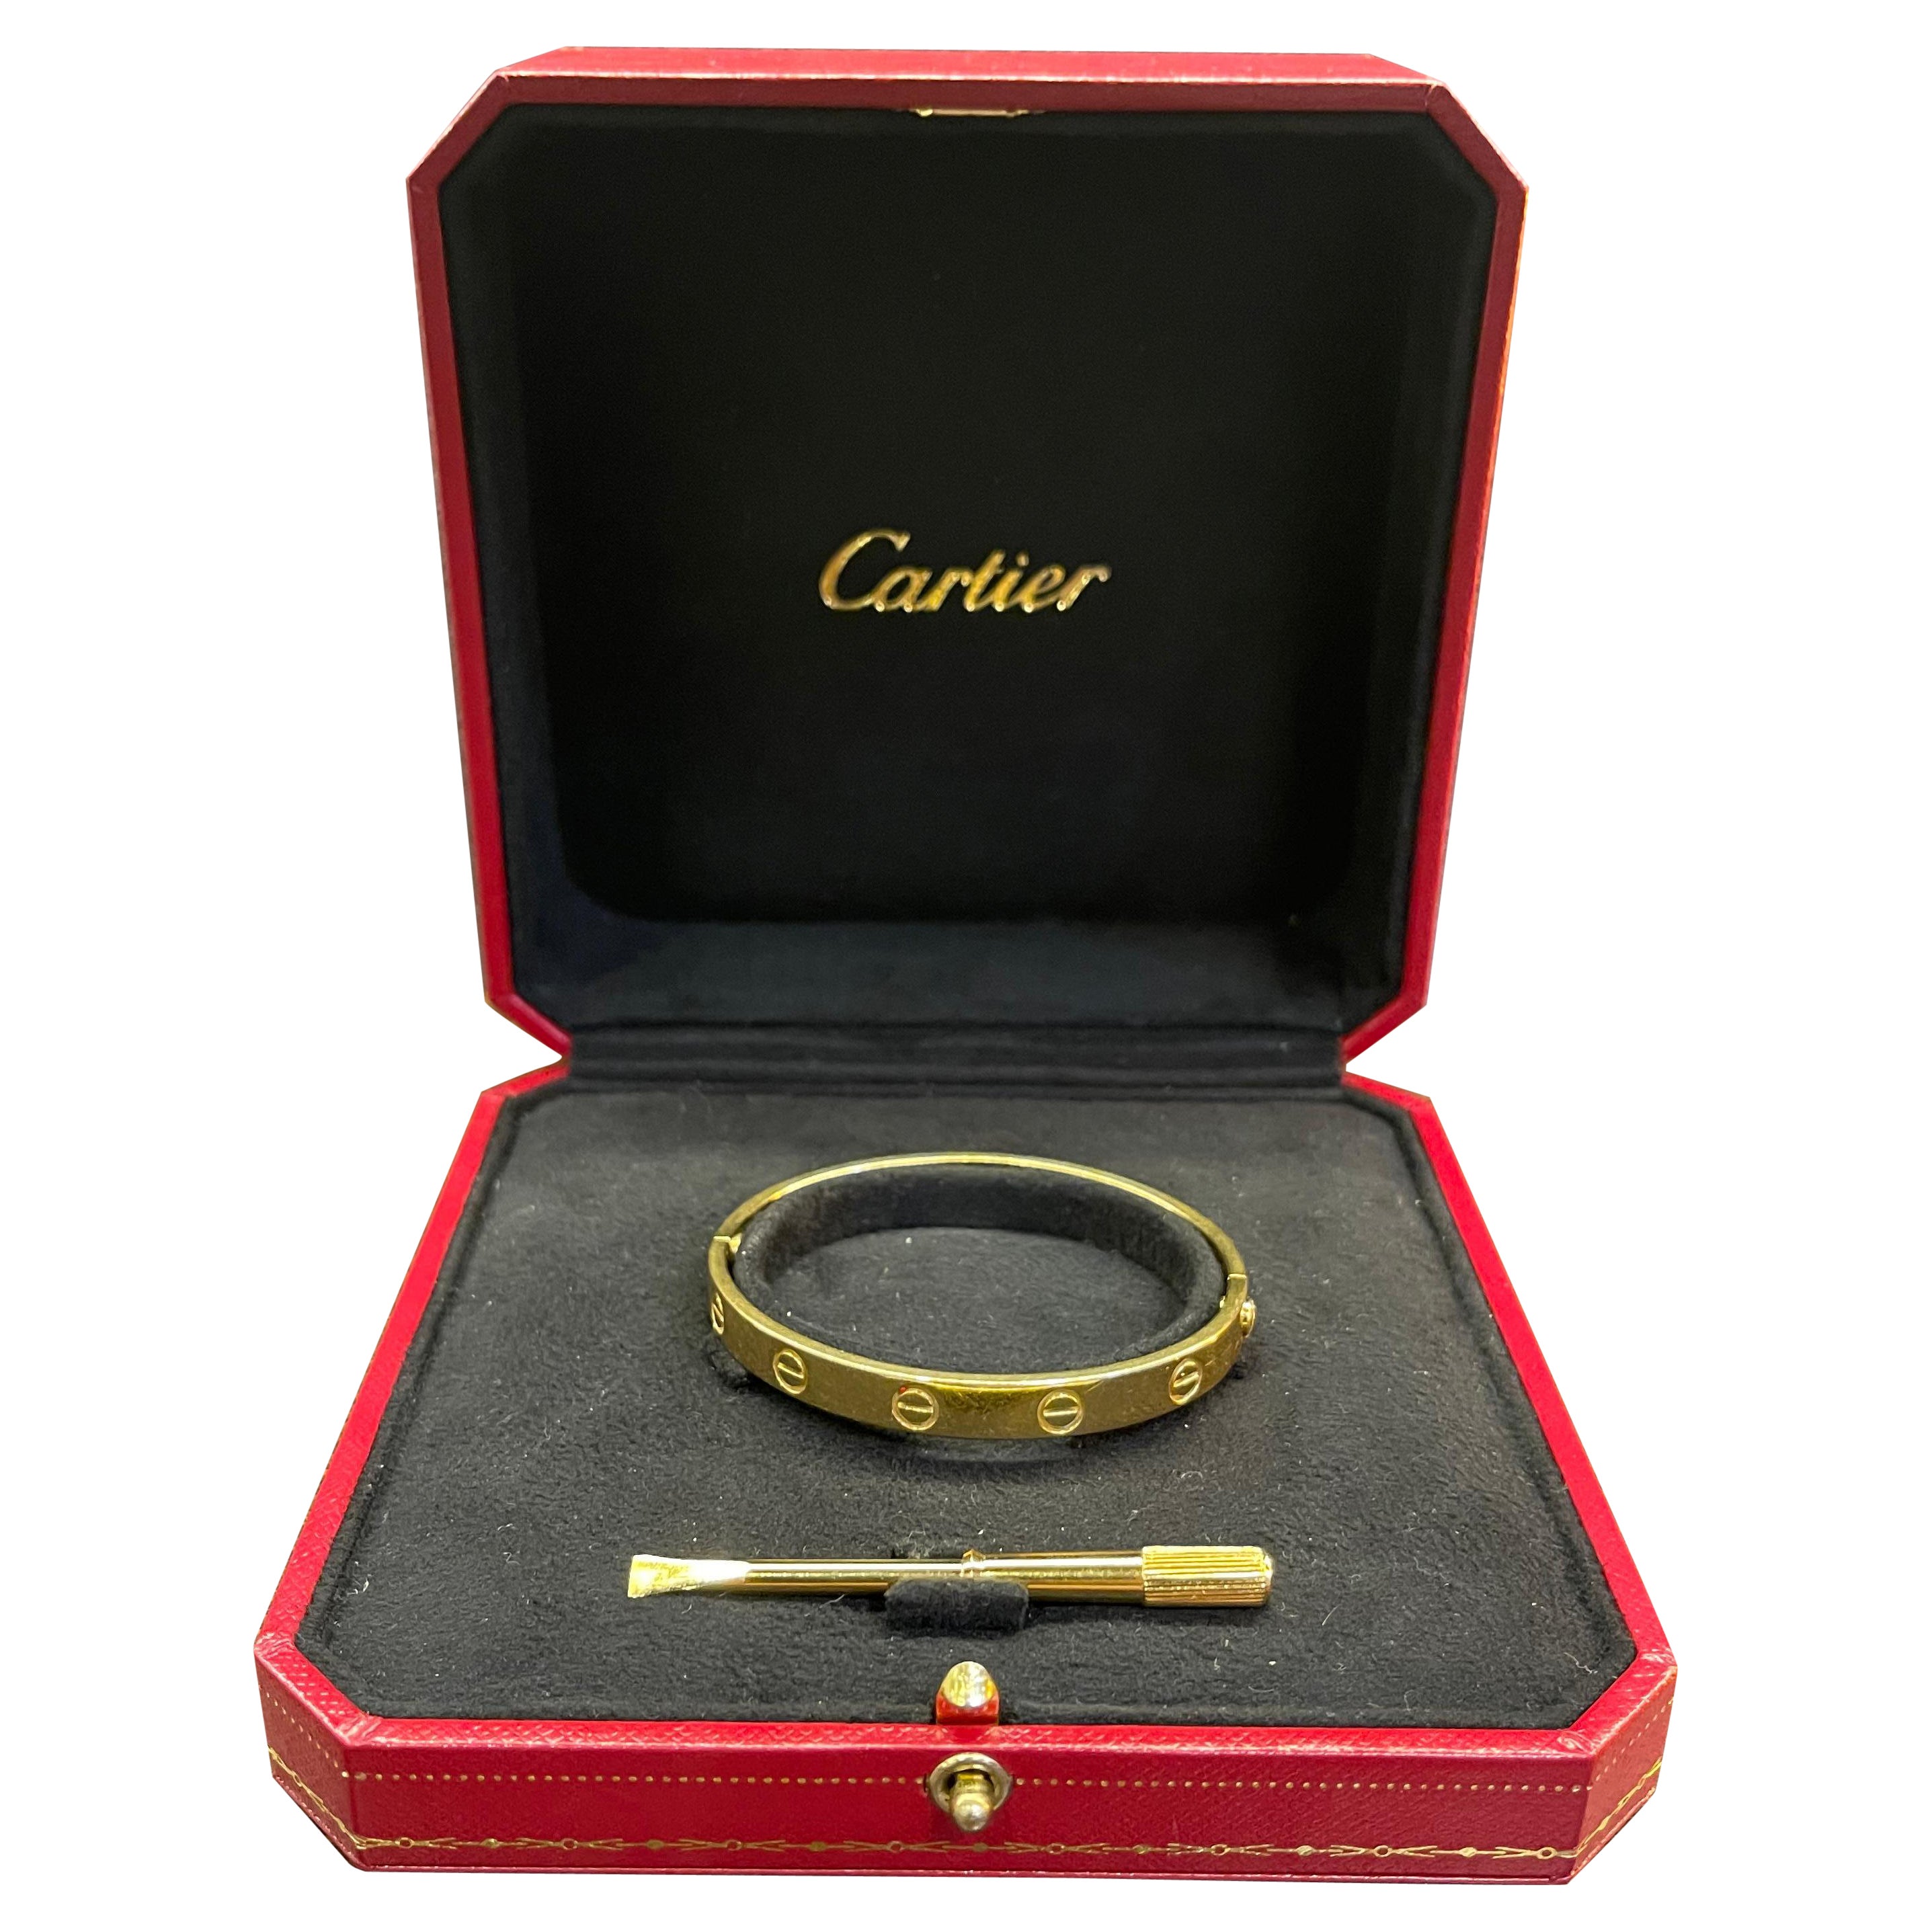 Cartier 101: The Love Collection - The Vault